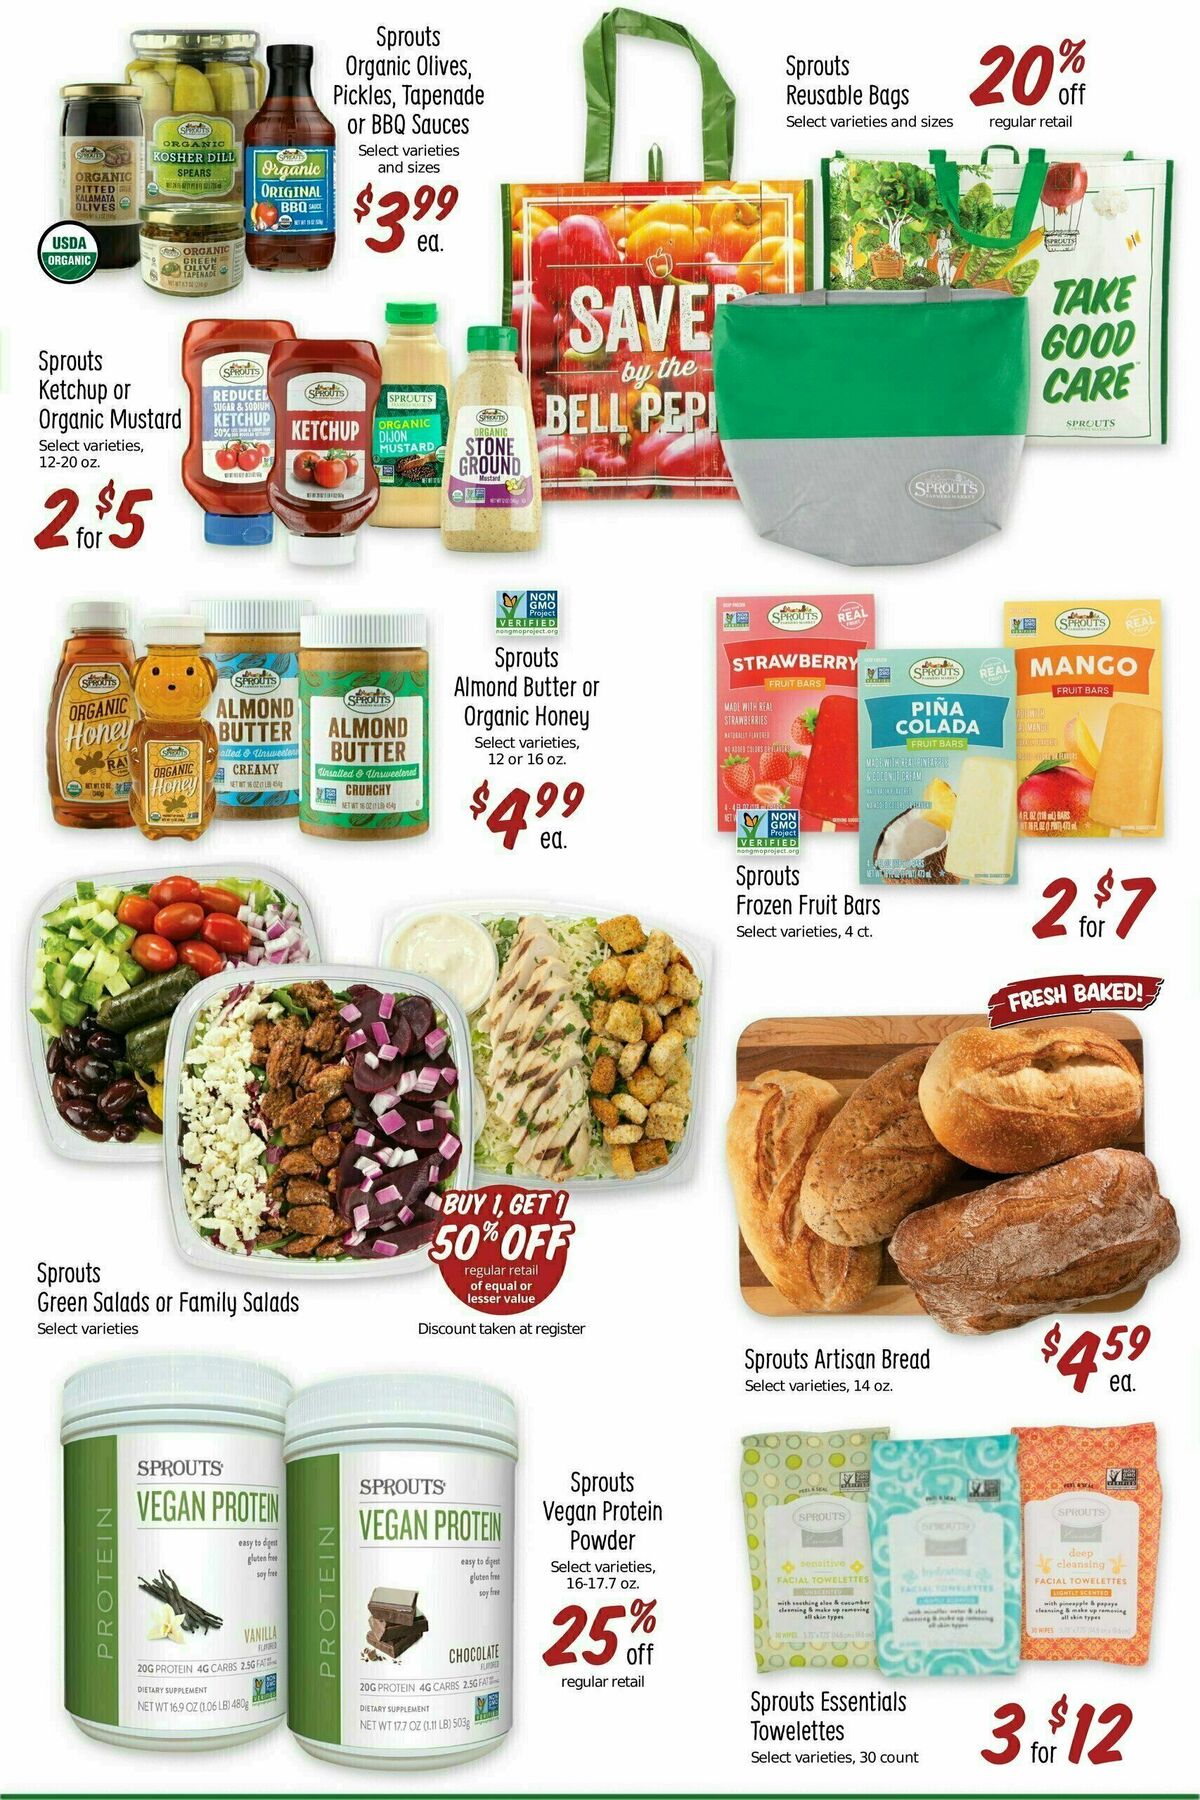 Sprouts Farmers Market Weekly Ad from July 19